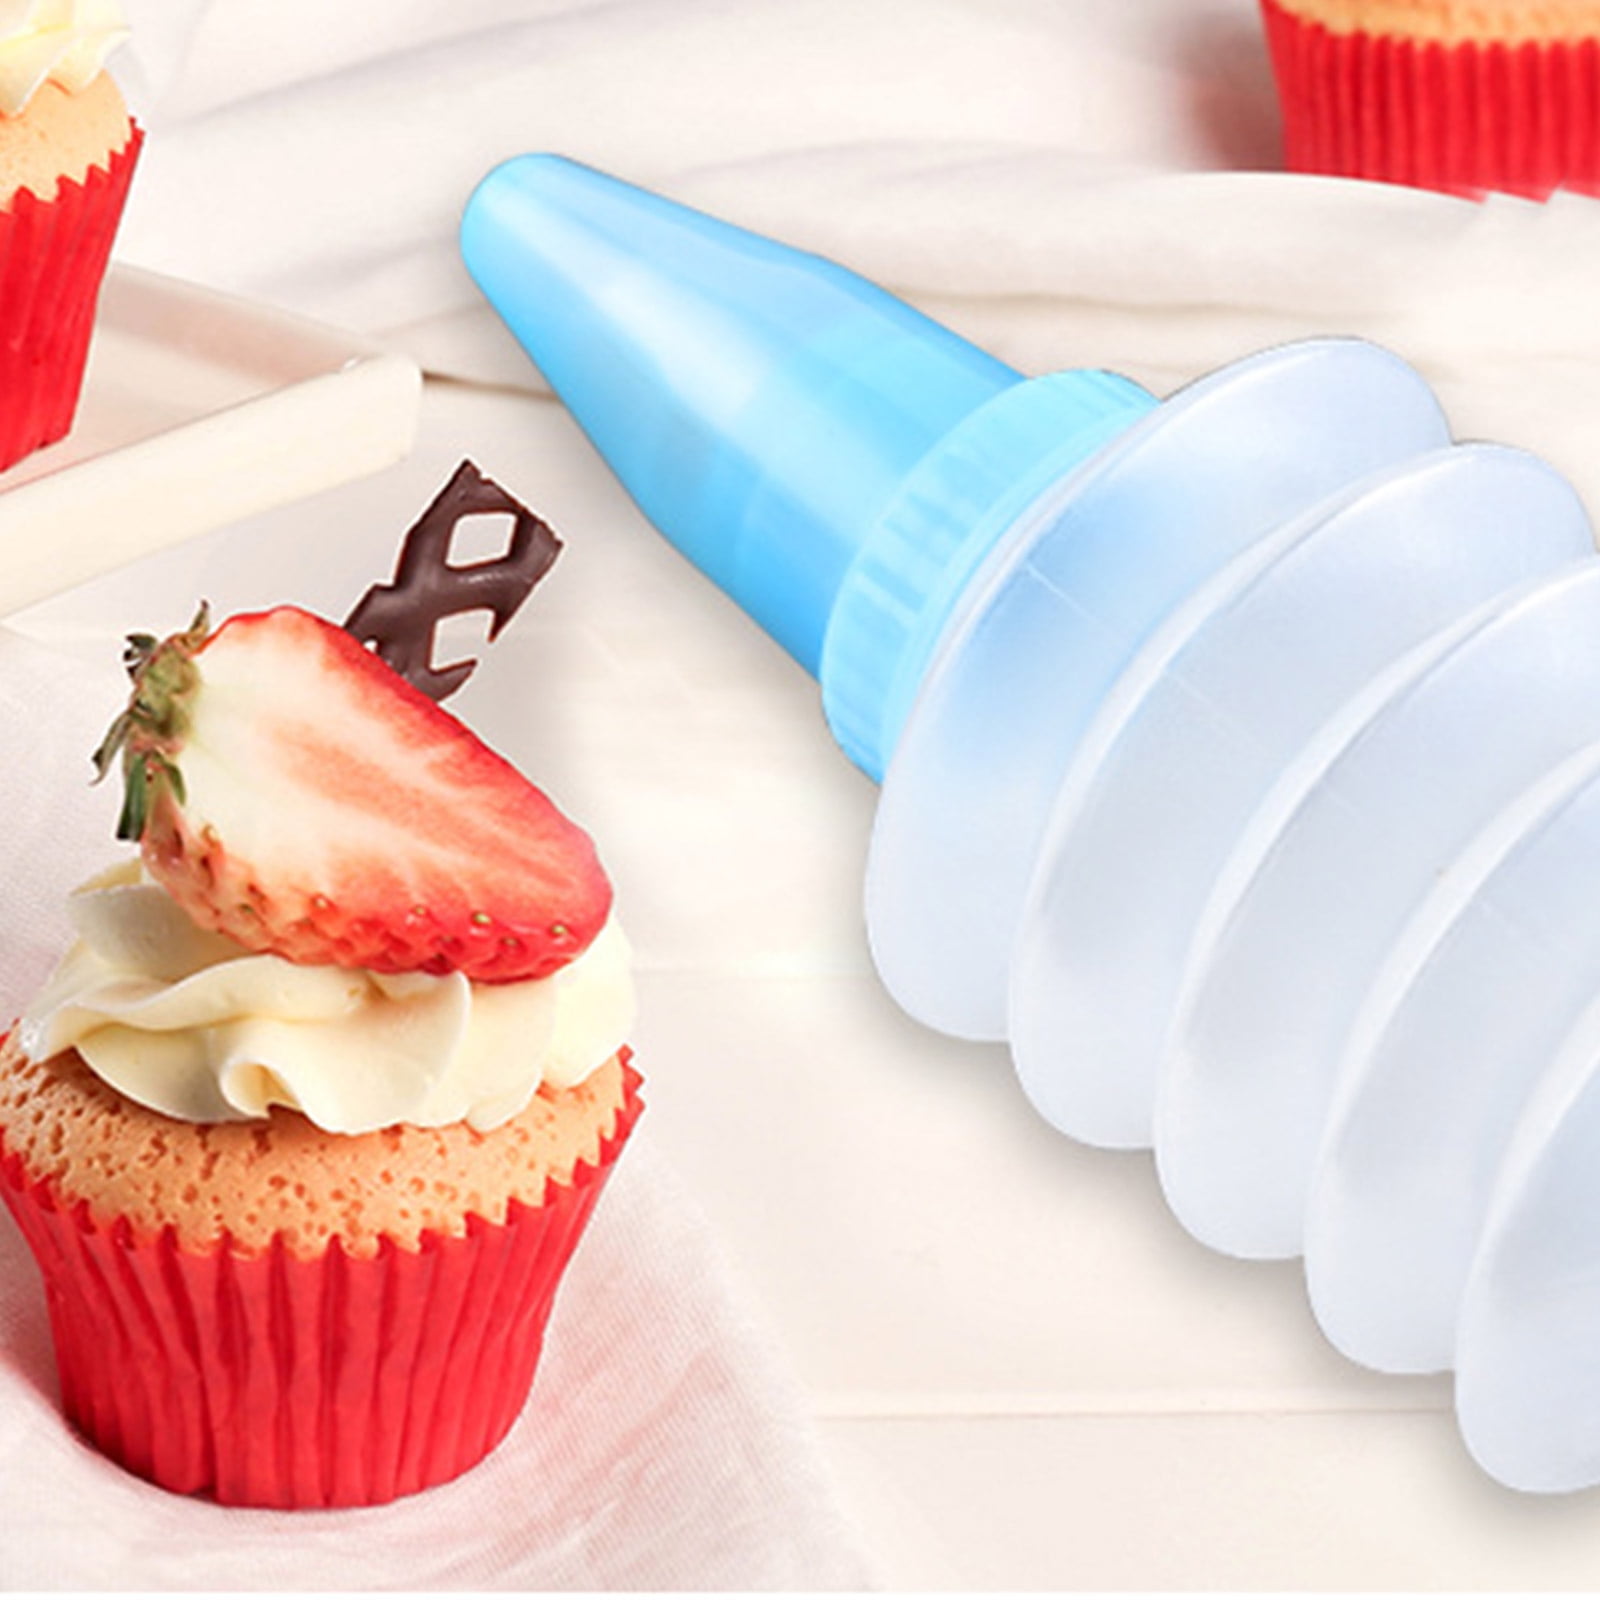 BYDOT Icing Bottle Soft Squeeze for Icing, Ketchup, Frosting